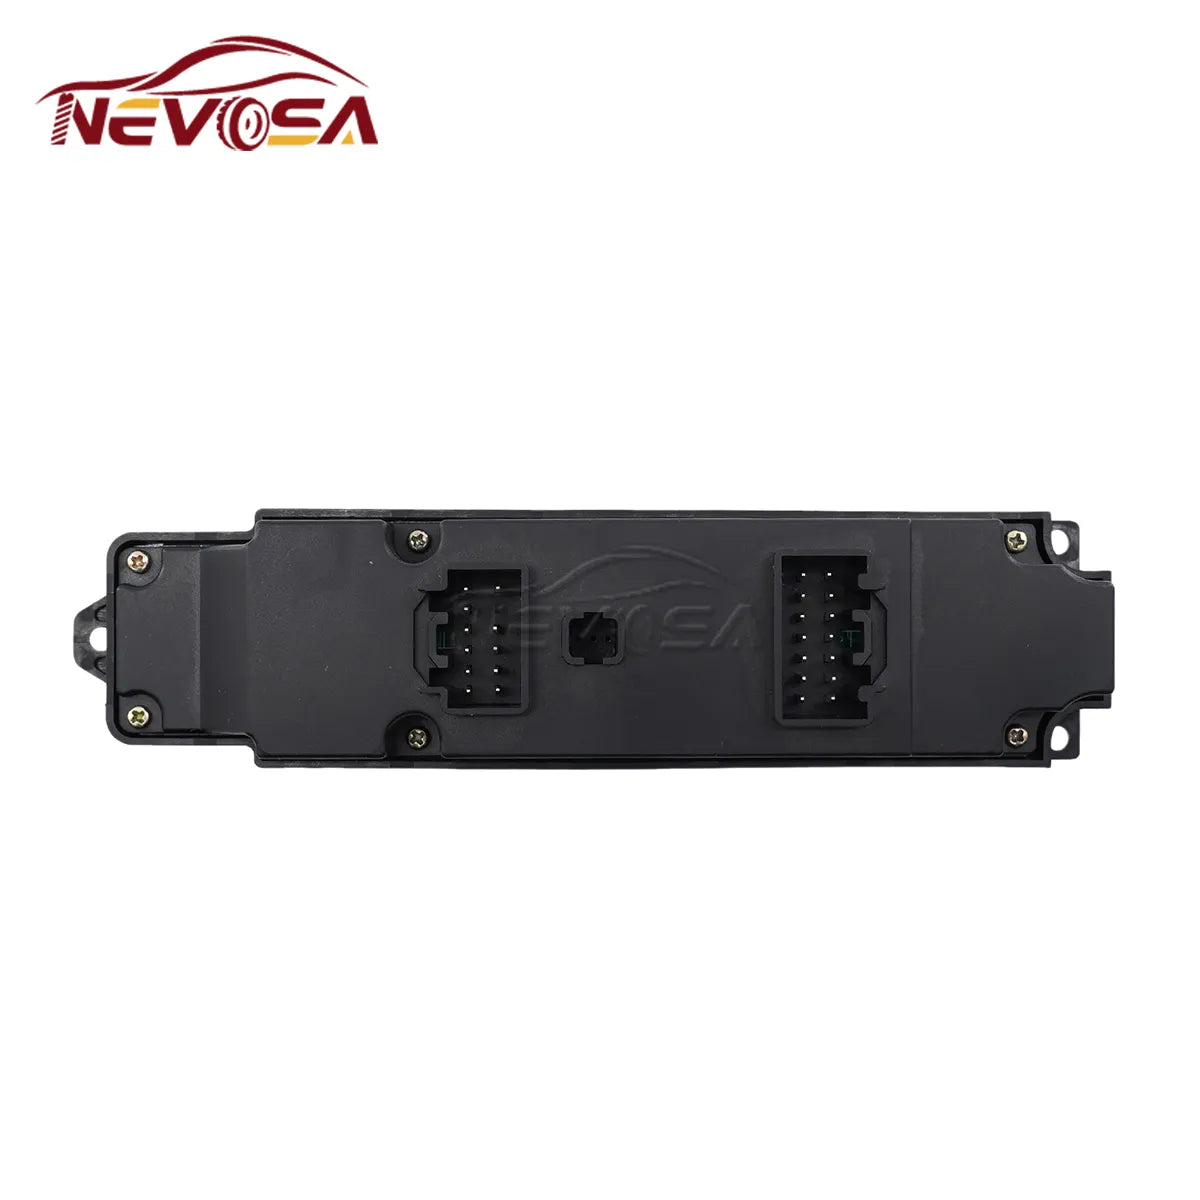 NEVOSA For Mazda 2 M2 2007-2013 Window Switch Control Glass Lifter Regulator Button Front Left Driver Door DF73-66-350B